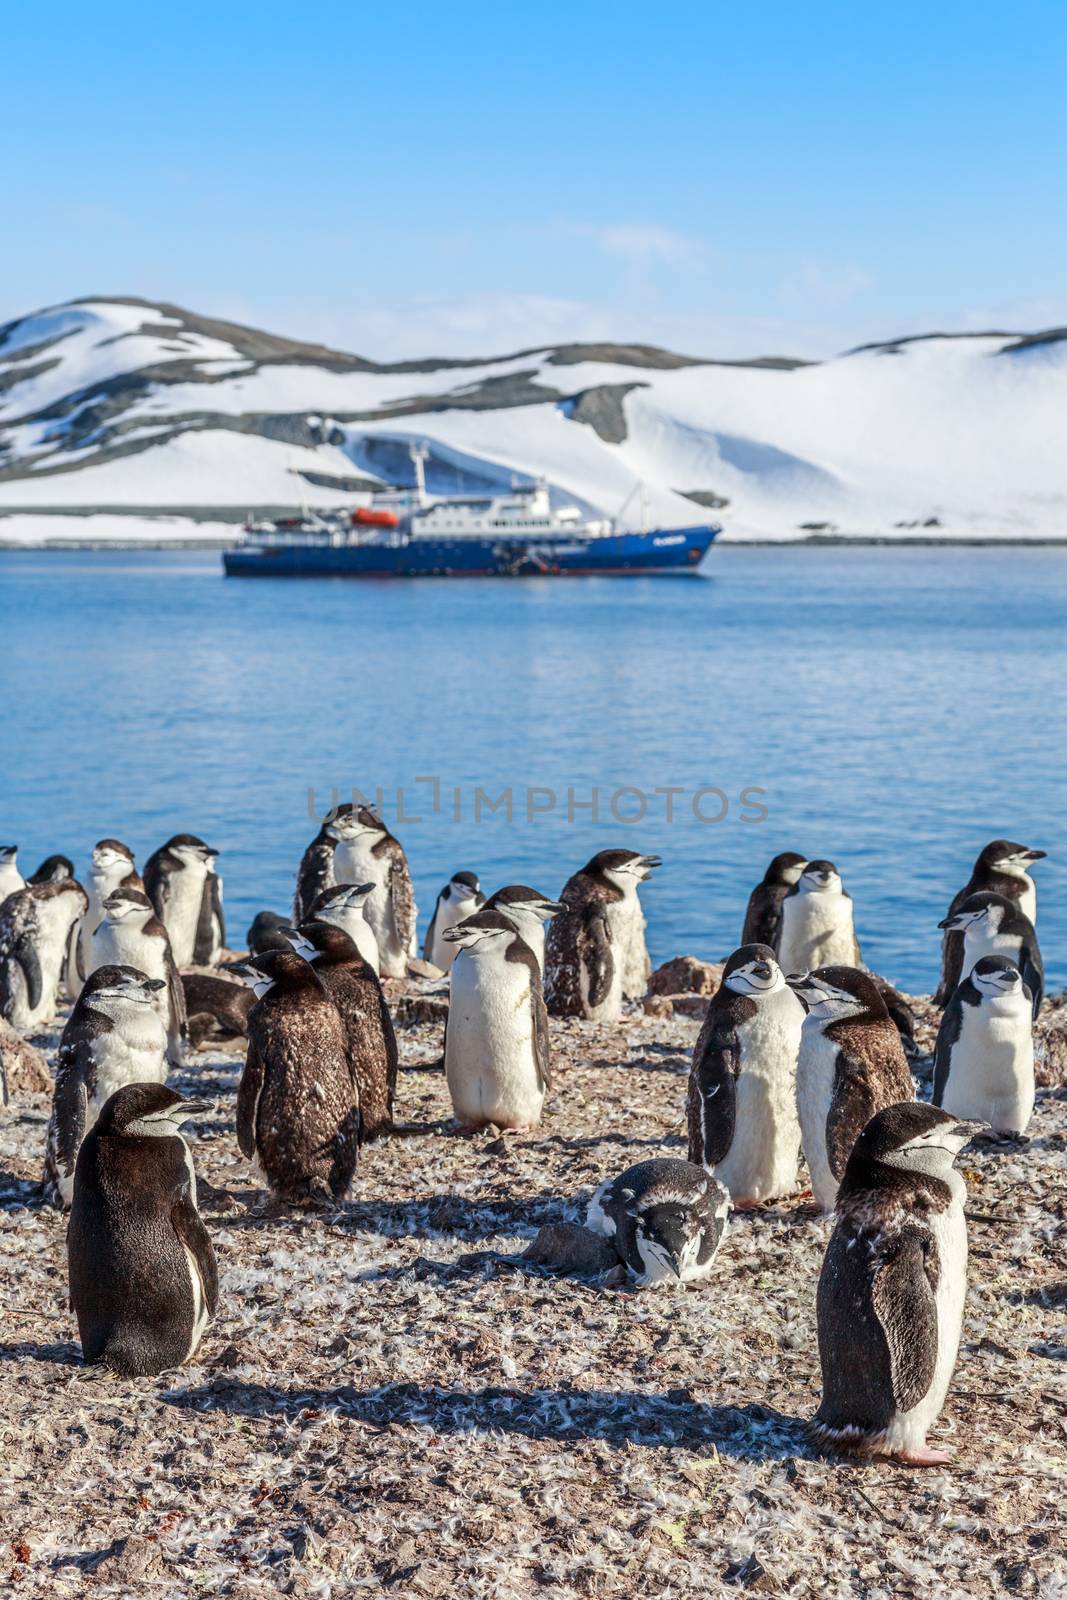 Chinstrap penguins crowd standing on the rocks and touristic cru by ambeon